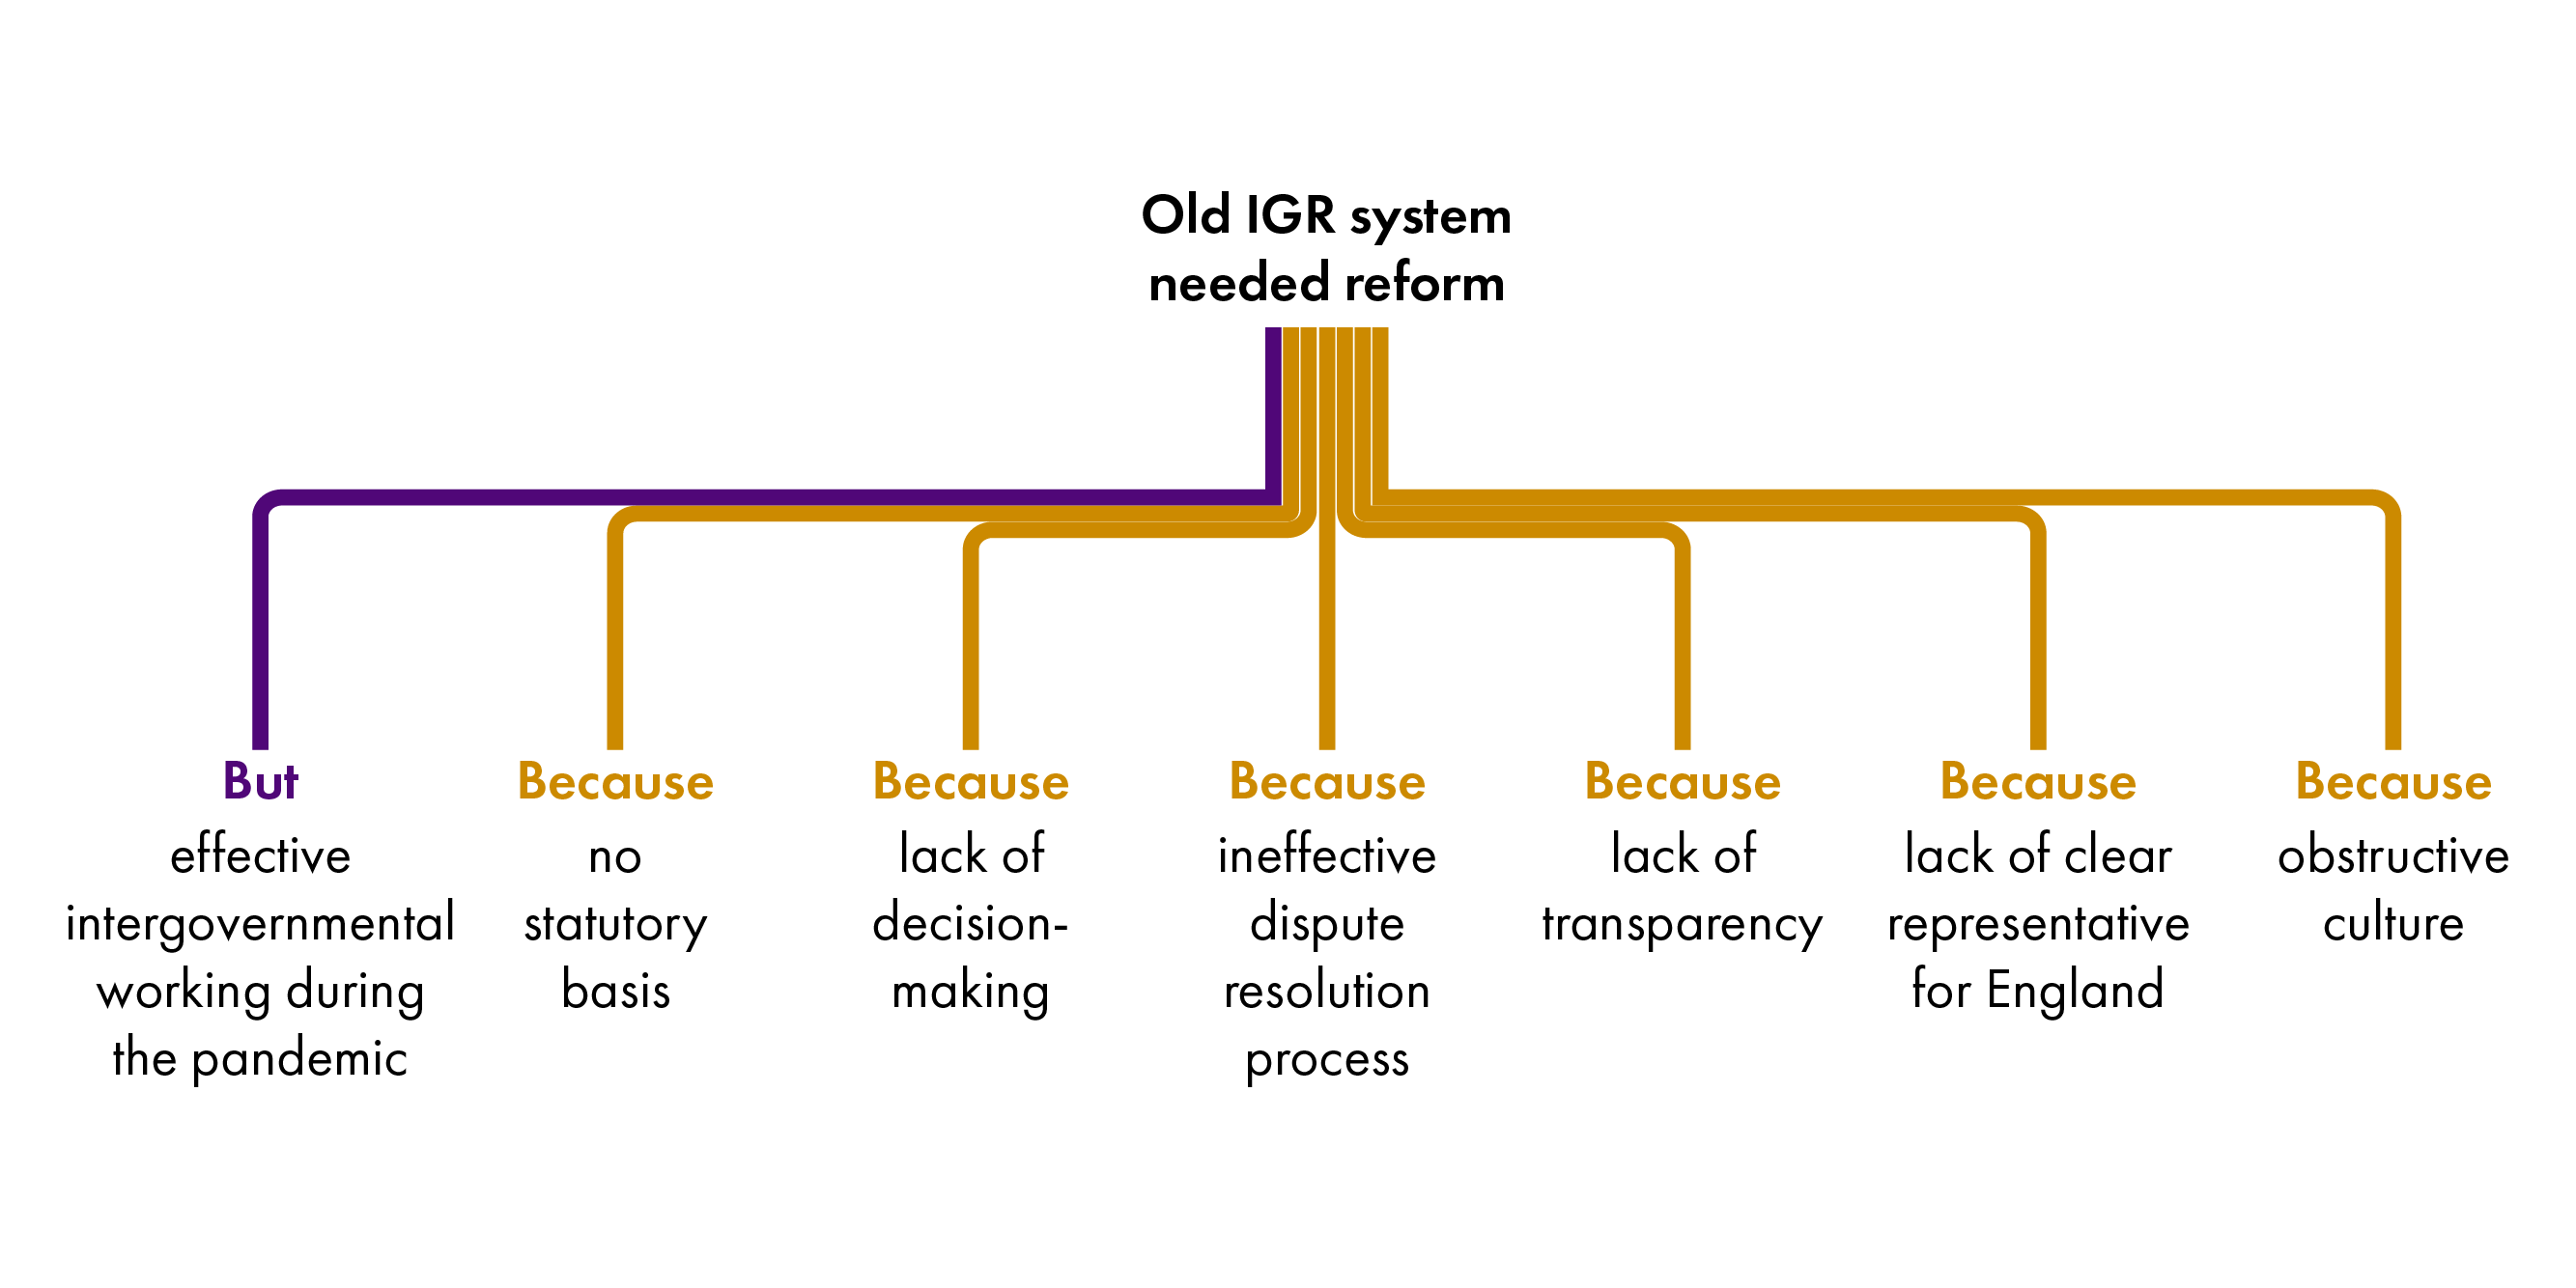 The image shows a diagram that represents the structure of arguments that will be discussed in the discussion section of this briefing. Central text that says 'old IGR system needed reform' signifies the hypothesis. Underneath it are seven text blocks which are connected by purple or yellow lines. Six text blocks connected by yellow lines, labelled 'because', signify reasons for the hypothesis. One text block connected by a purple line, labelled 'but', signifies a counter-point. The text blocks containing reasons correspond to each of the headings in the next section and the text block containing a counter-point says 'effective recent intergovernmental working during pandemic'.